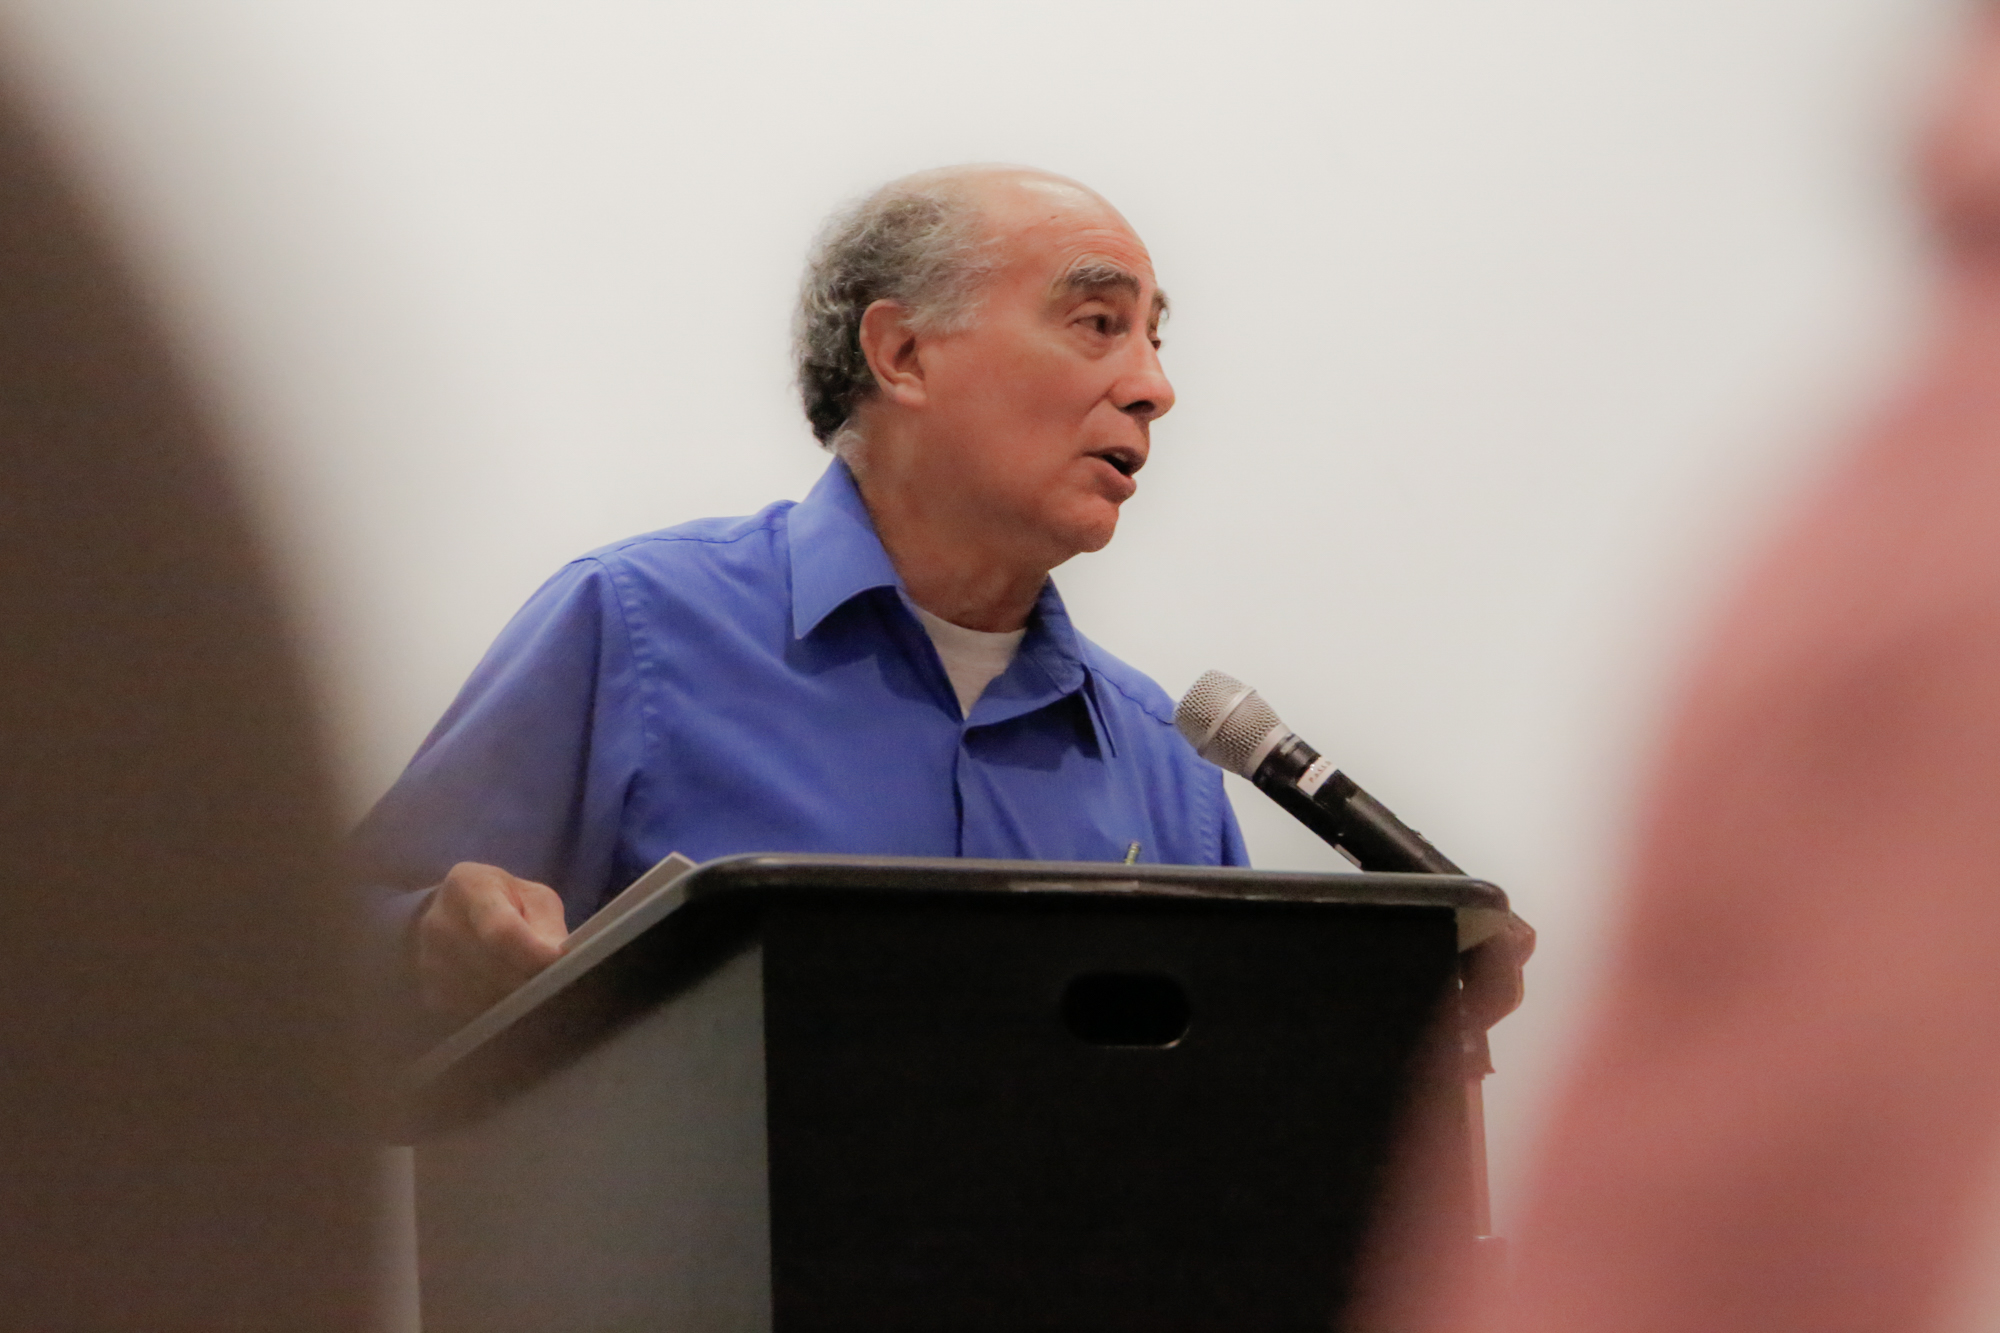  Poet Ernest Padilla reads from his work at the "Modern Poetic Permutations" event held at Santa Monica College on Thursday April 19 2018 in Santa monica, California. (Ruth Iorio/ Corsair Photo) 